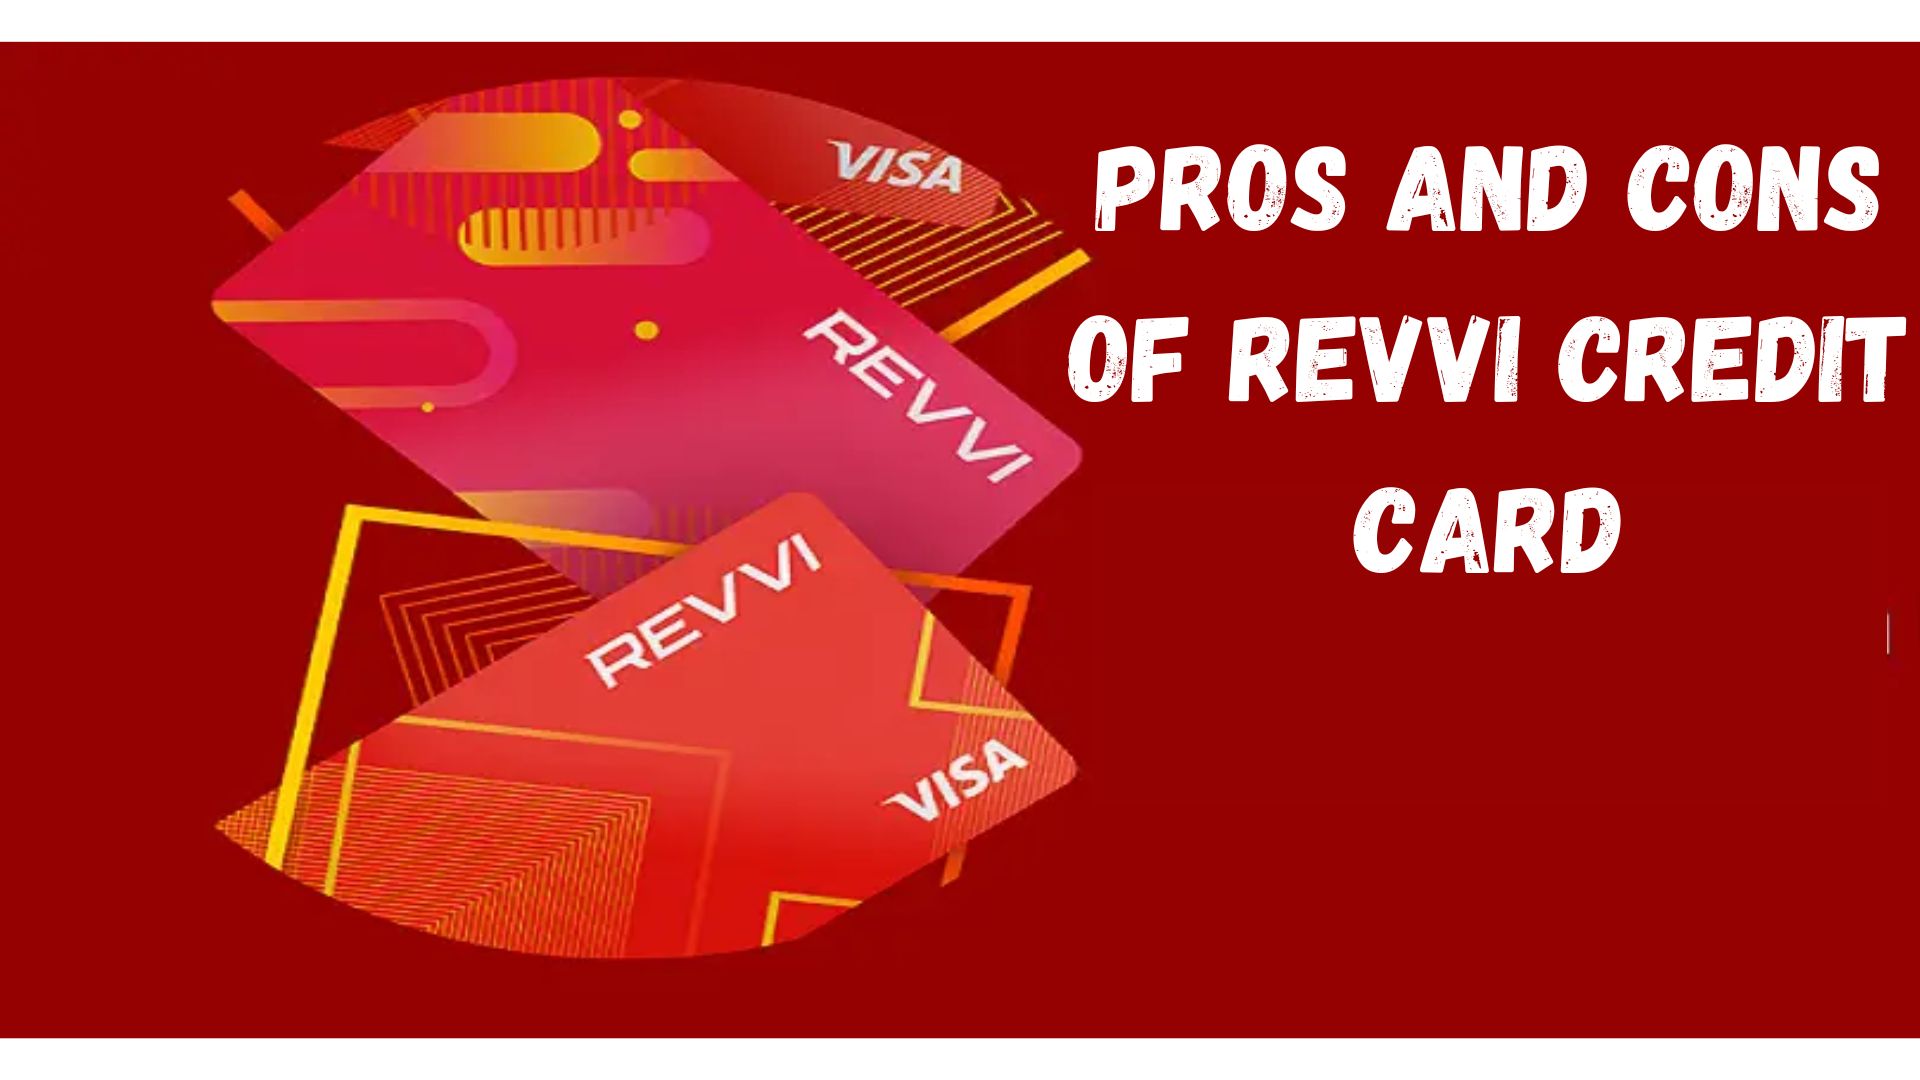 Pros and Cons of Revvi Credit Card